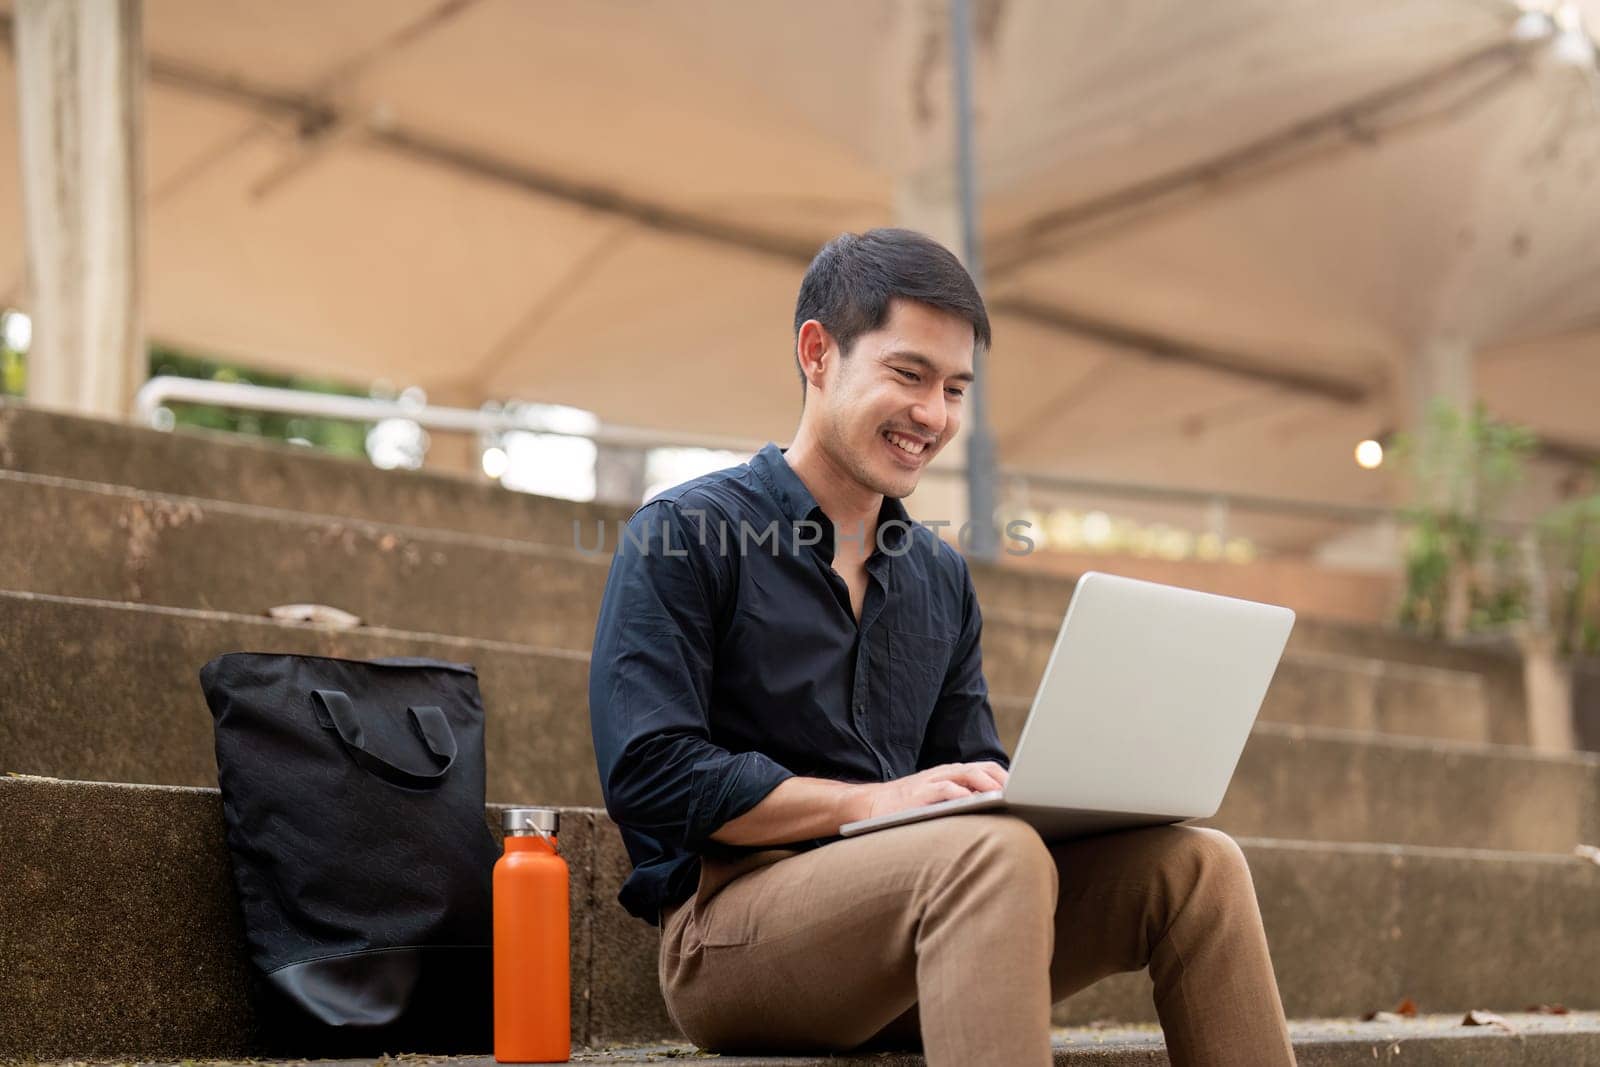 Asian businessman with reusable eco friendly ecological cup using laptop and sitting outside the office building. Eco friendly, sustainable lifestyle concept.